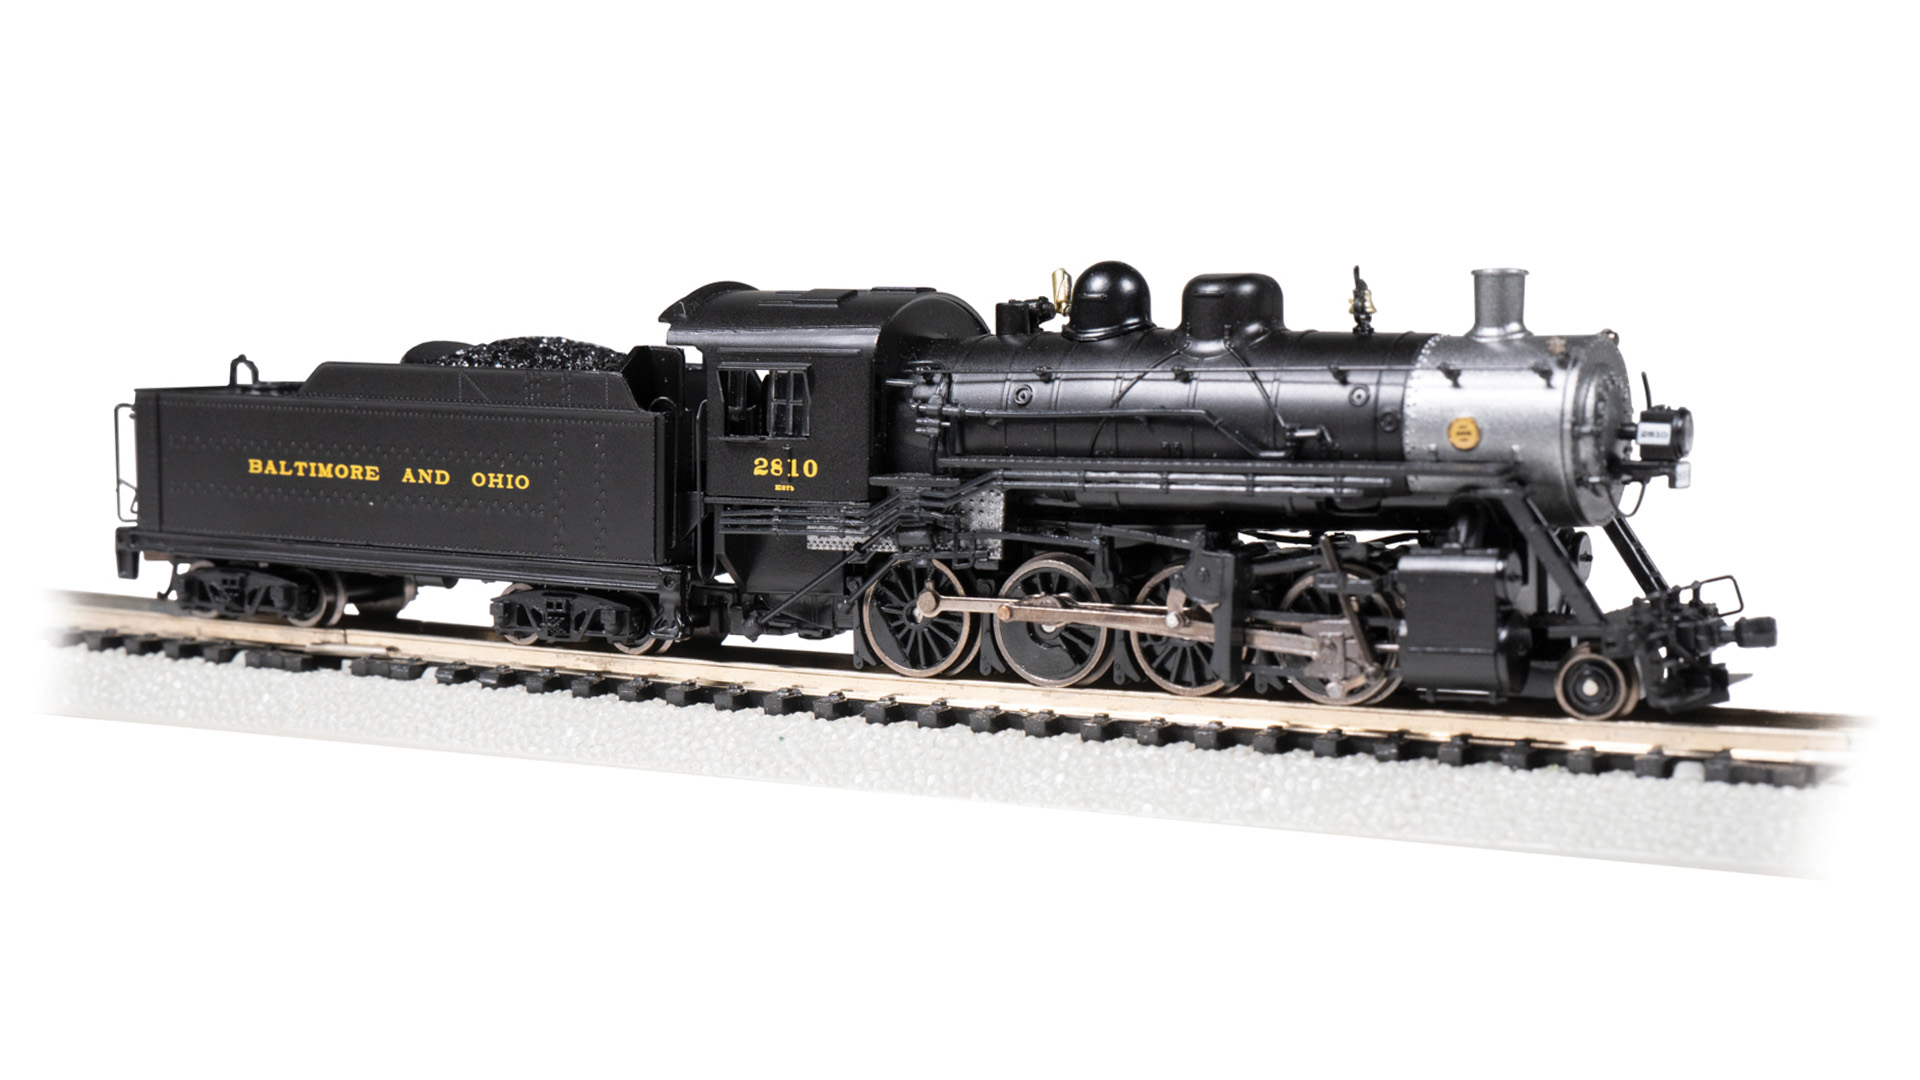 N Scale - Bachmann - 54151 - Locomotive, Steam, 2-8-0 Consolidation - Baltimore & Ohio - 2810